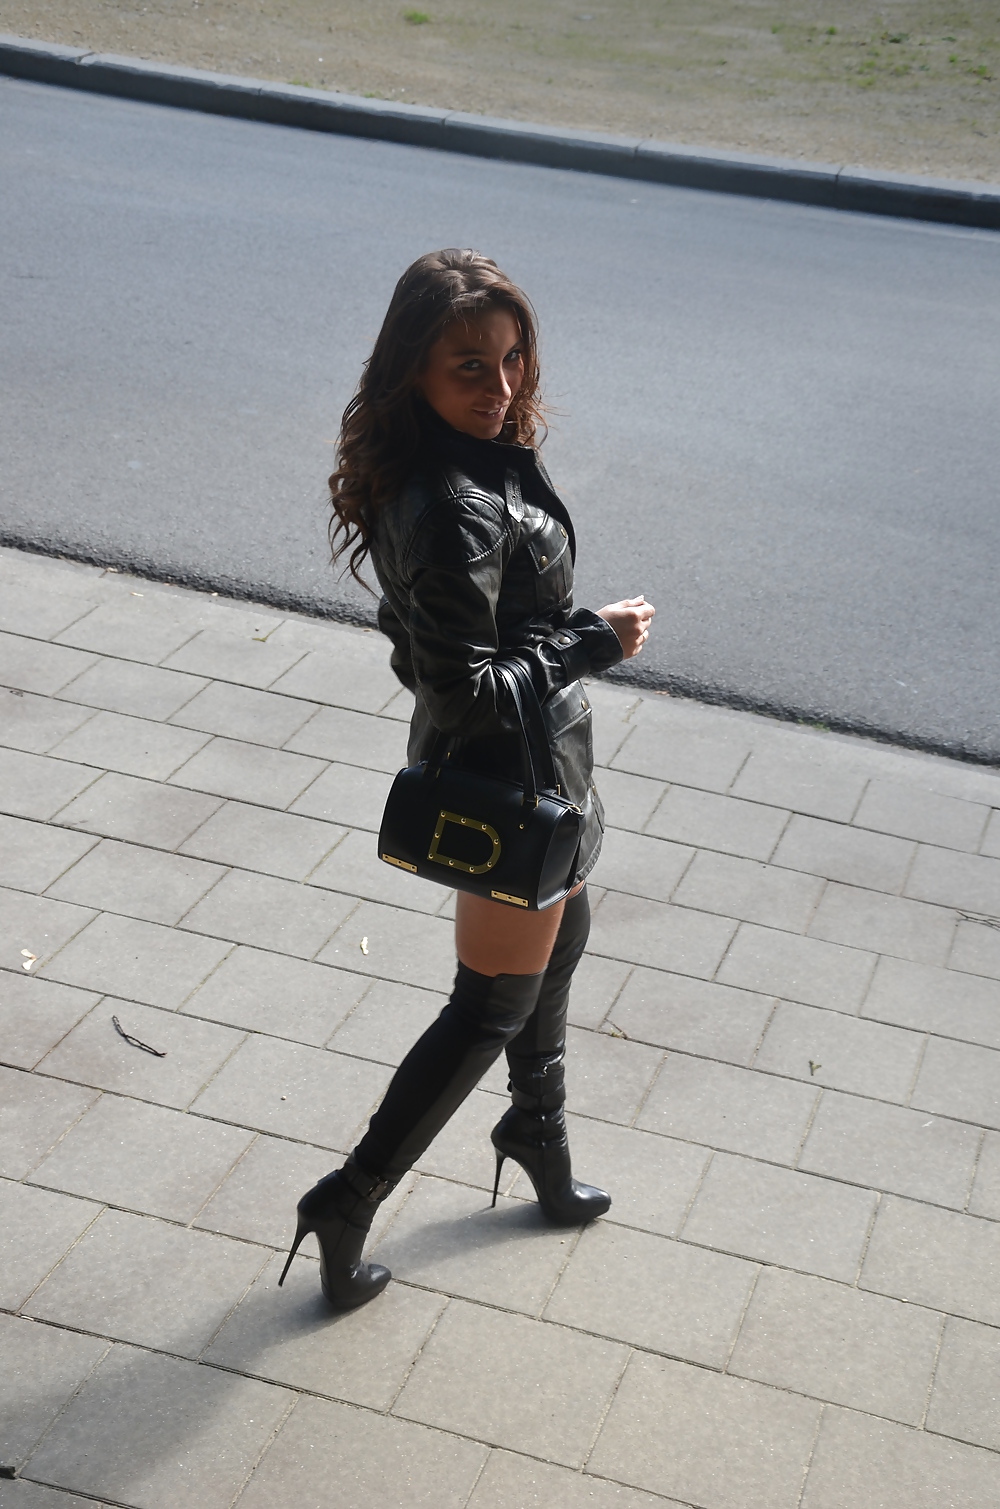 julie skyhigh in boots & leather miss sixty: gangbang girl adult photos